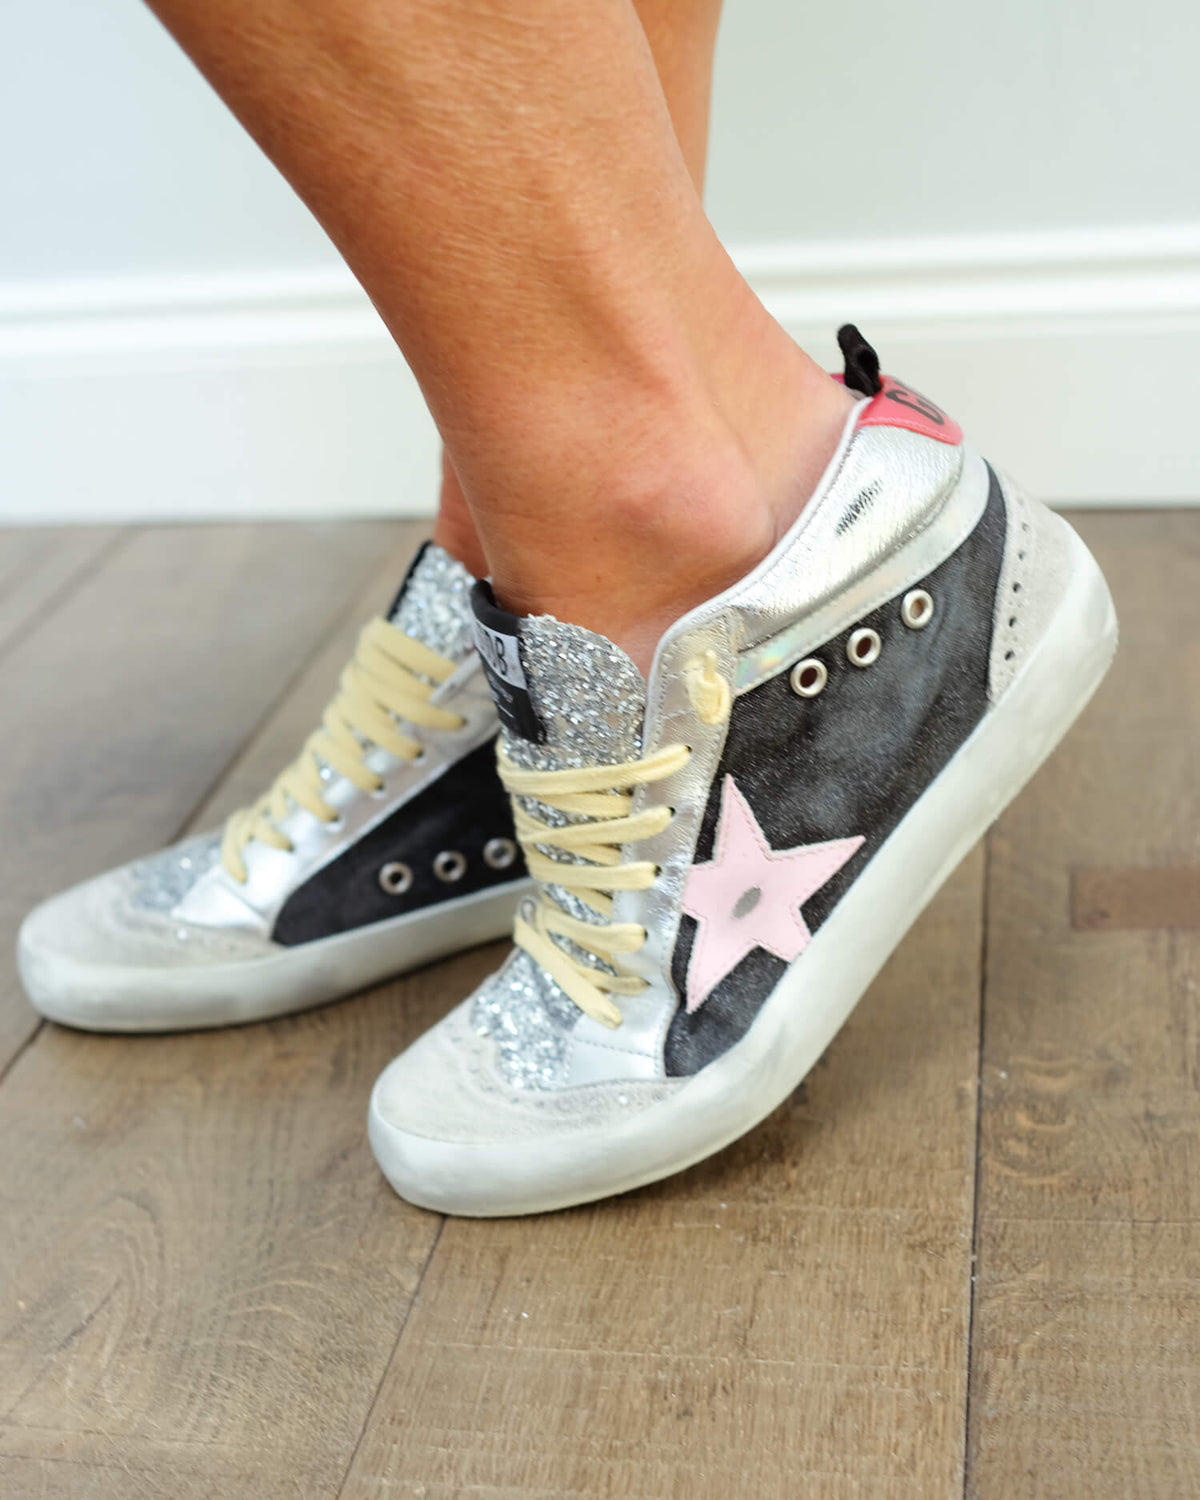 GG Mid star glitter 203 in black, silver, ice with pink star